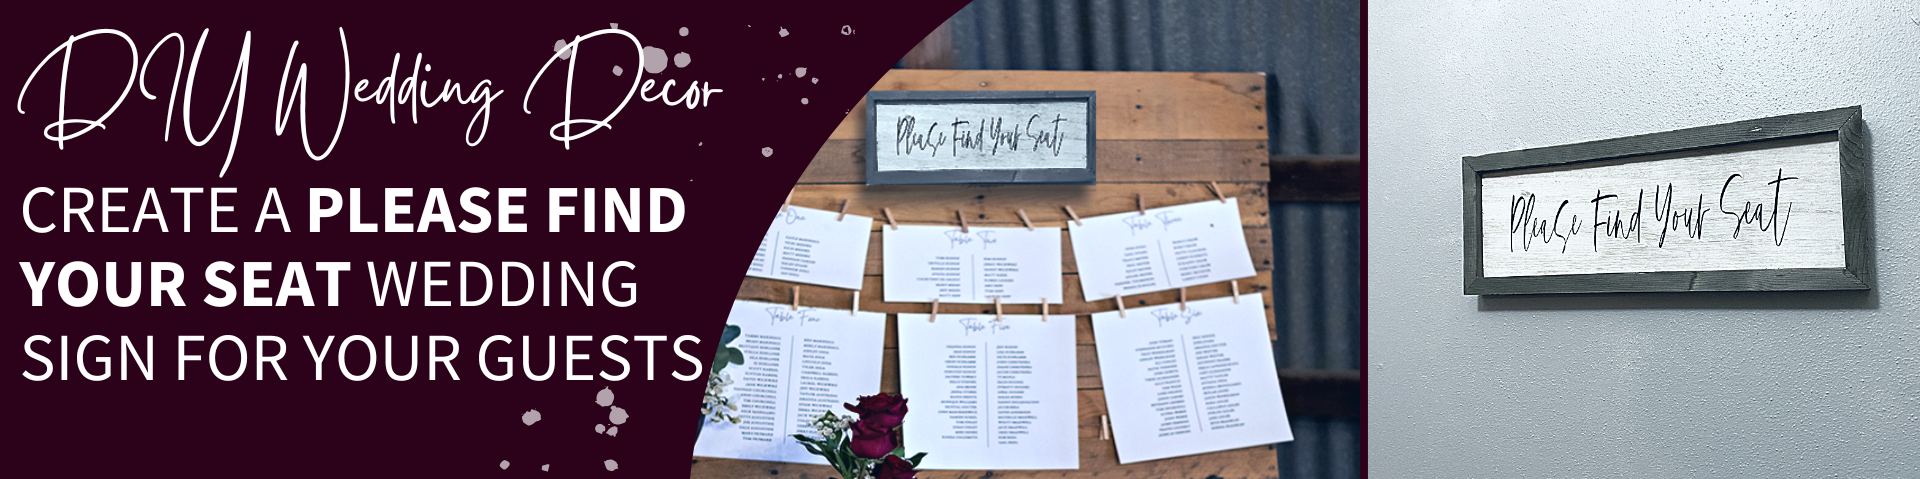 DIY Please Find Seat Wedding Sign For Your Guests